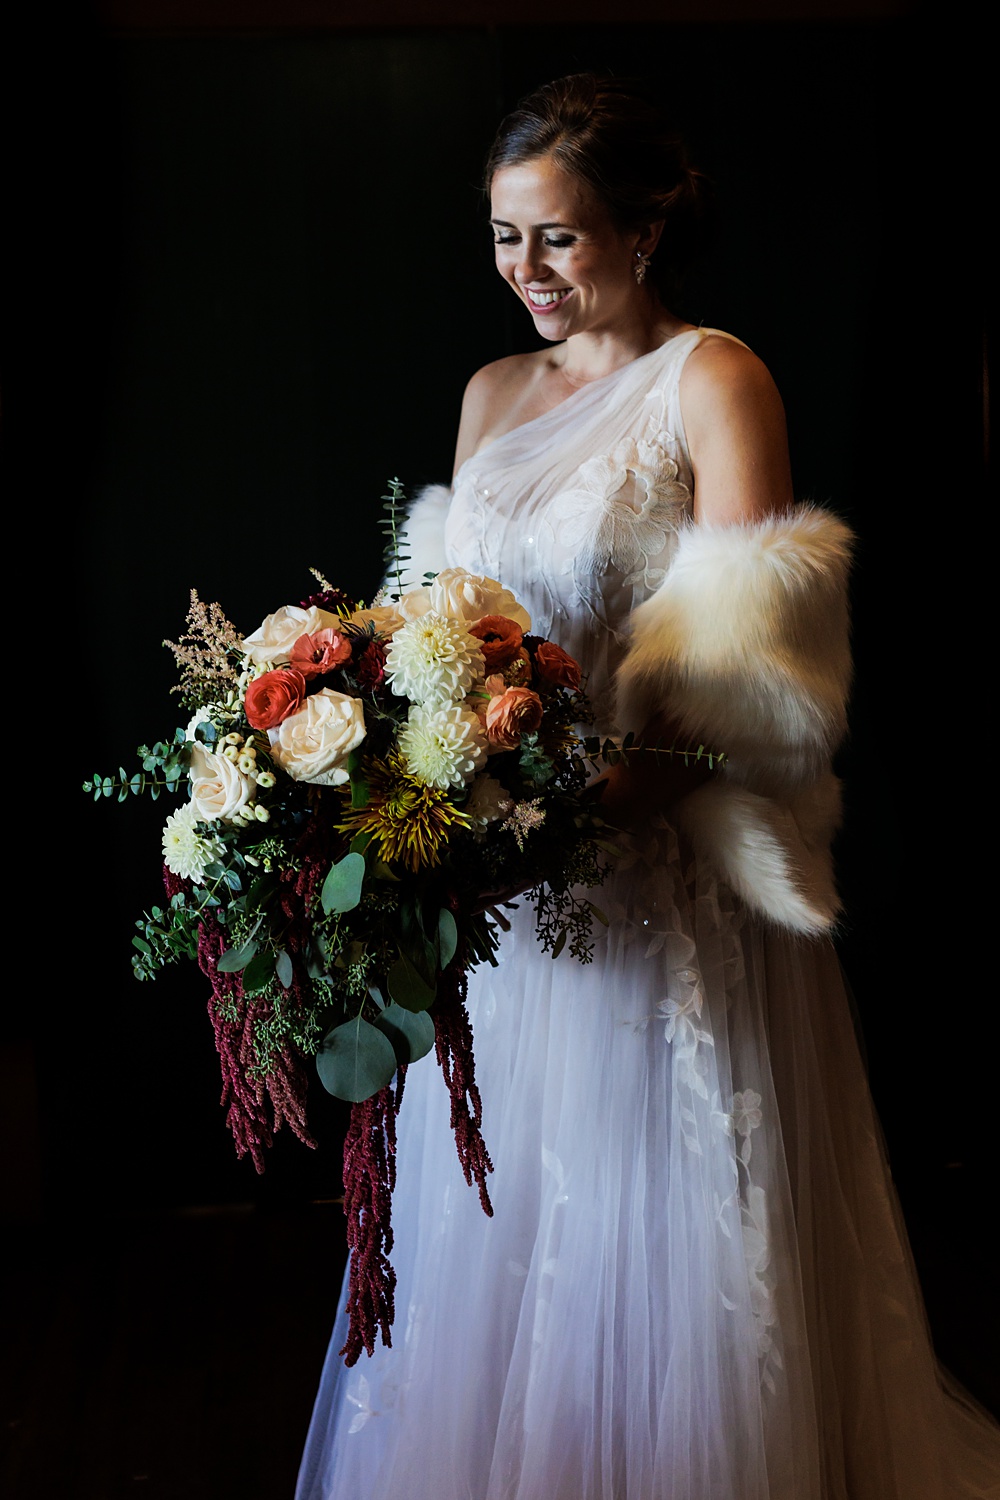 The bride and her flowers on her fall wedding day in Maine